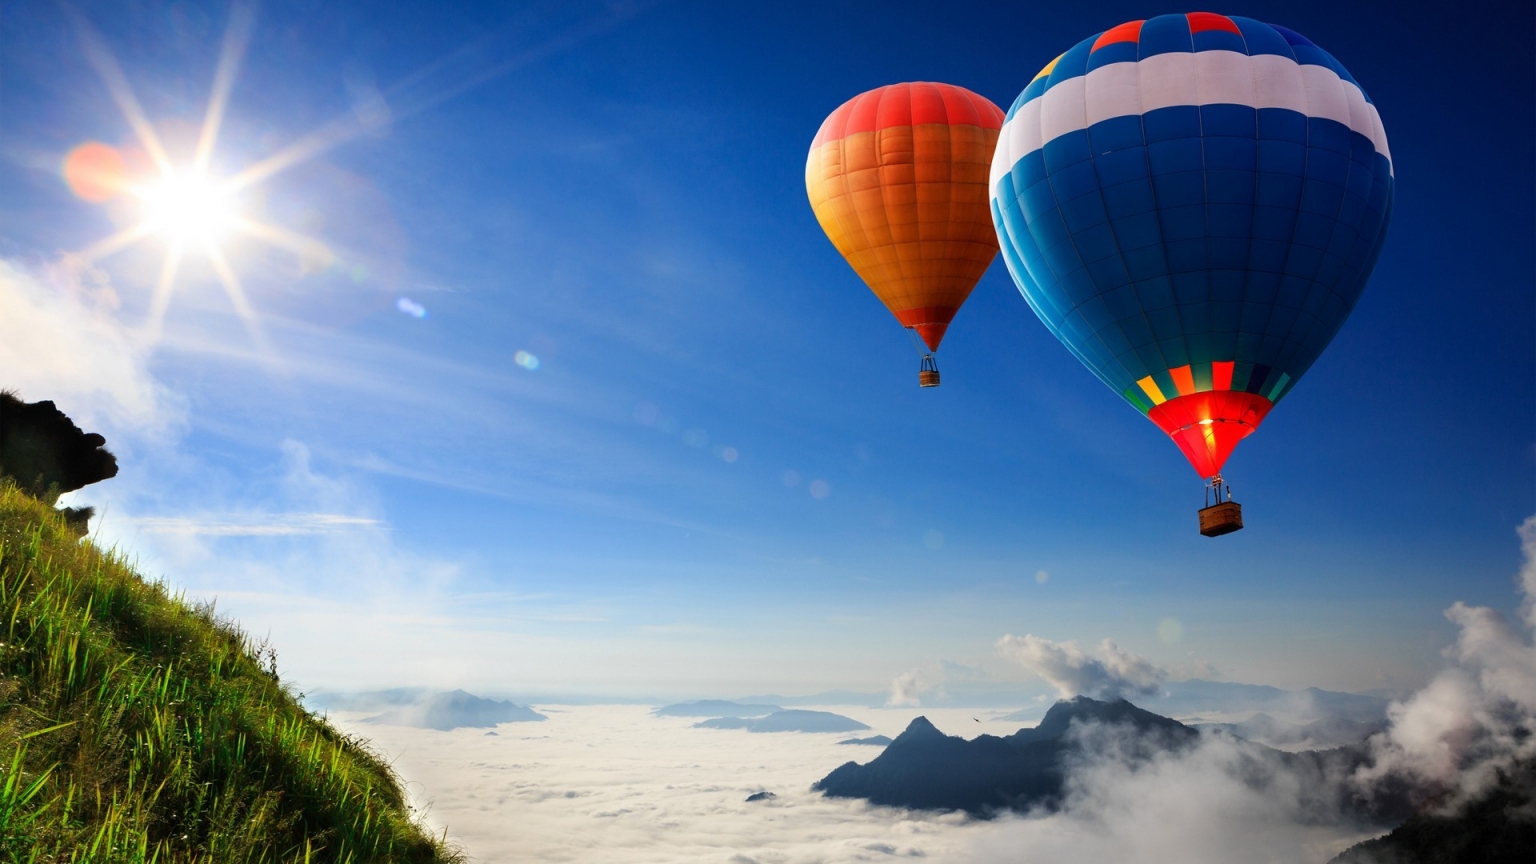 Hot Air Balloons for 1536 x 864 HDTV resolution